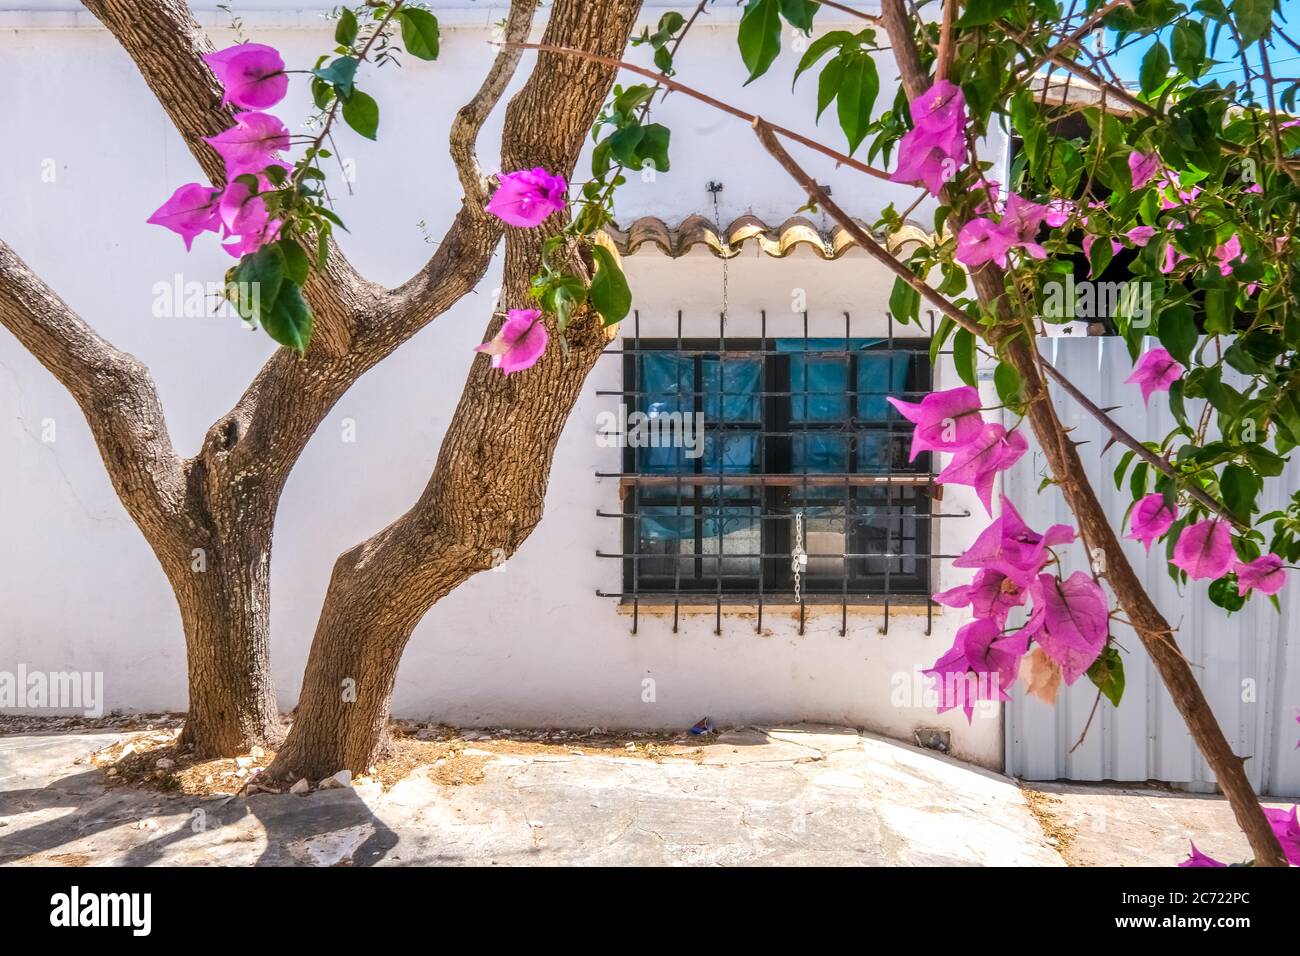 , , Olive tree and flowering bougavilla in a backyard in the tourist resort Cala d'Or on the south-east coast of Mallorca. barred window, Santanyí, Eu Stock Photo